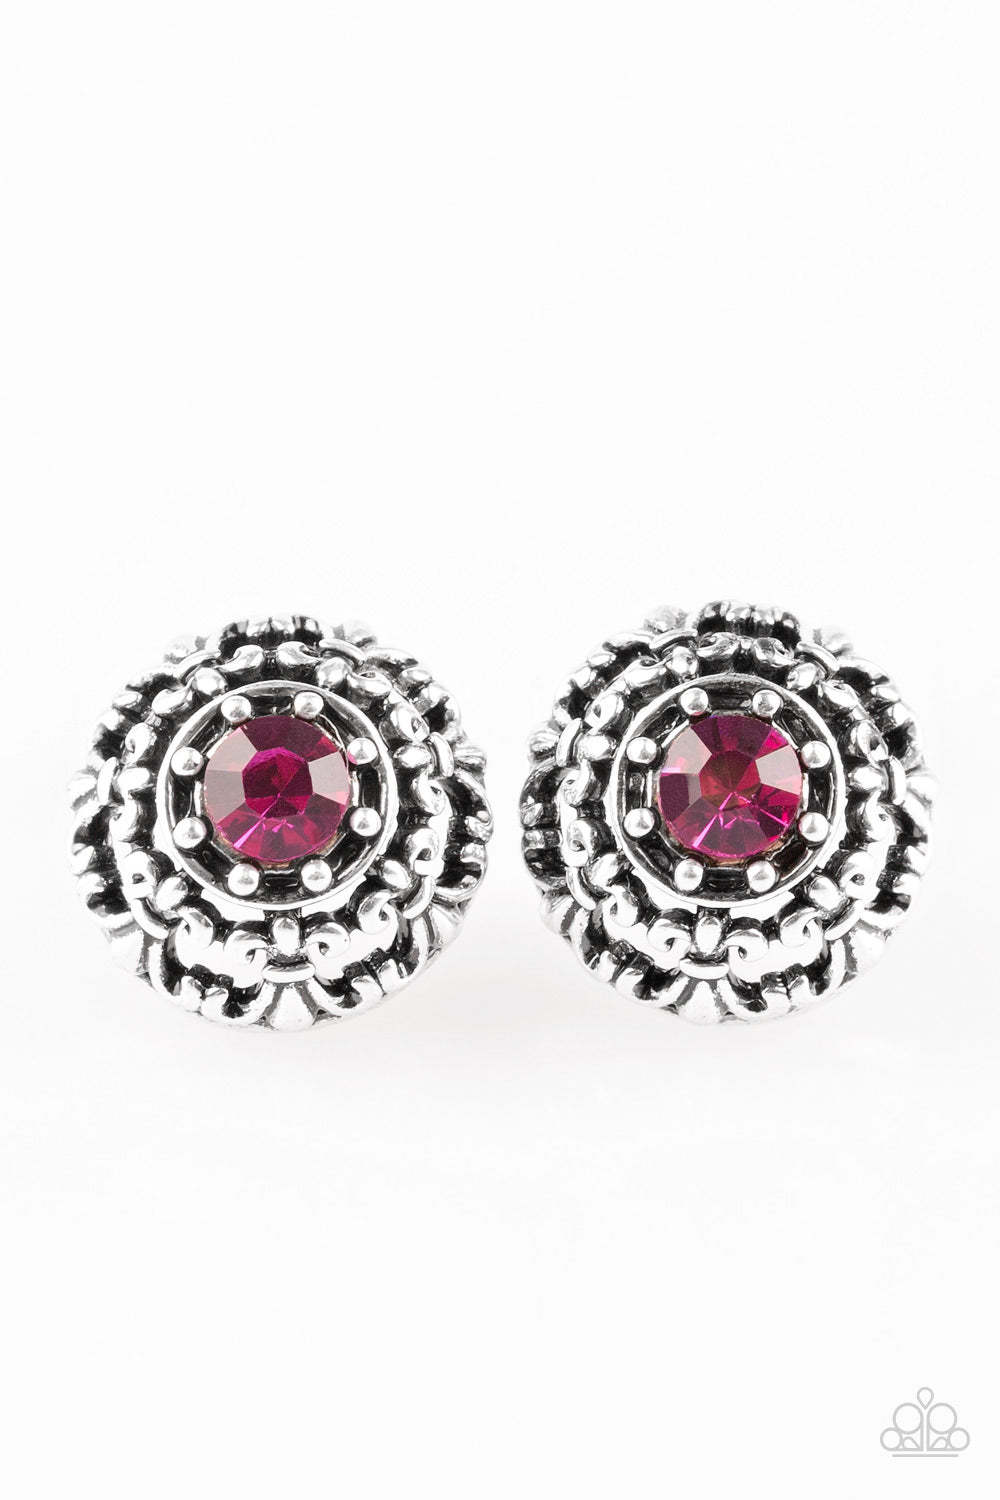 COURTLY COURTLINESS - PINK RHINESTONE SOLITAIRE SILVER FILIGREE FRAME POST EARRINGS